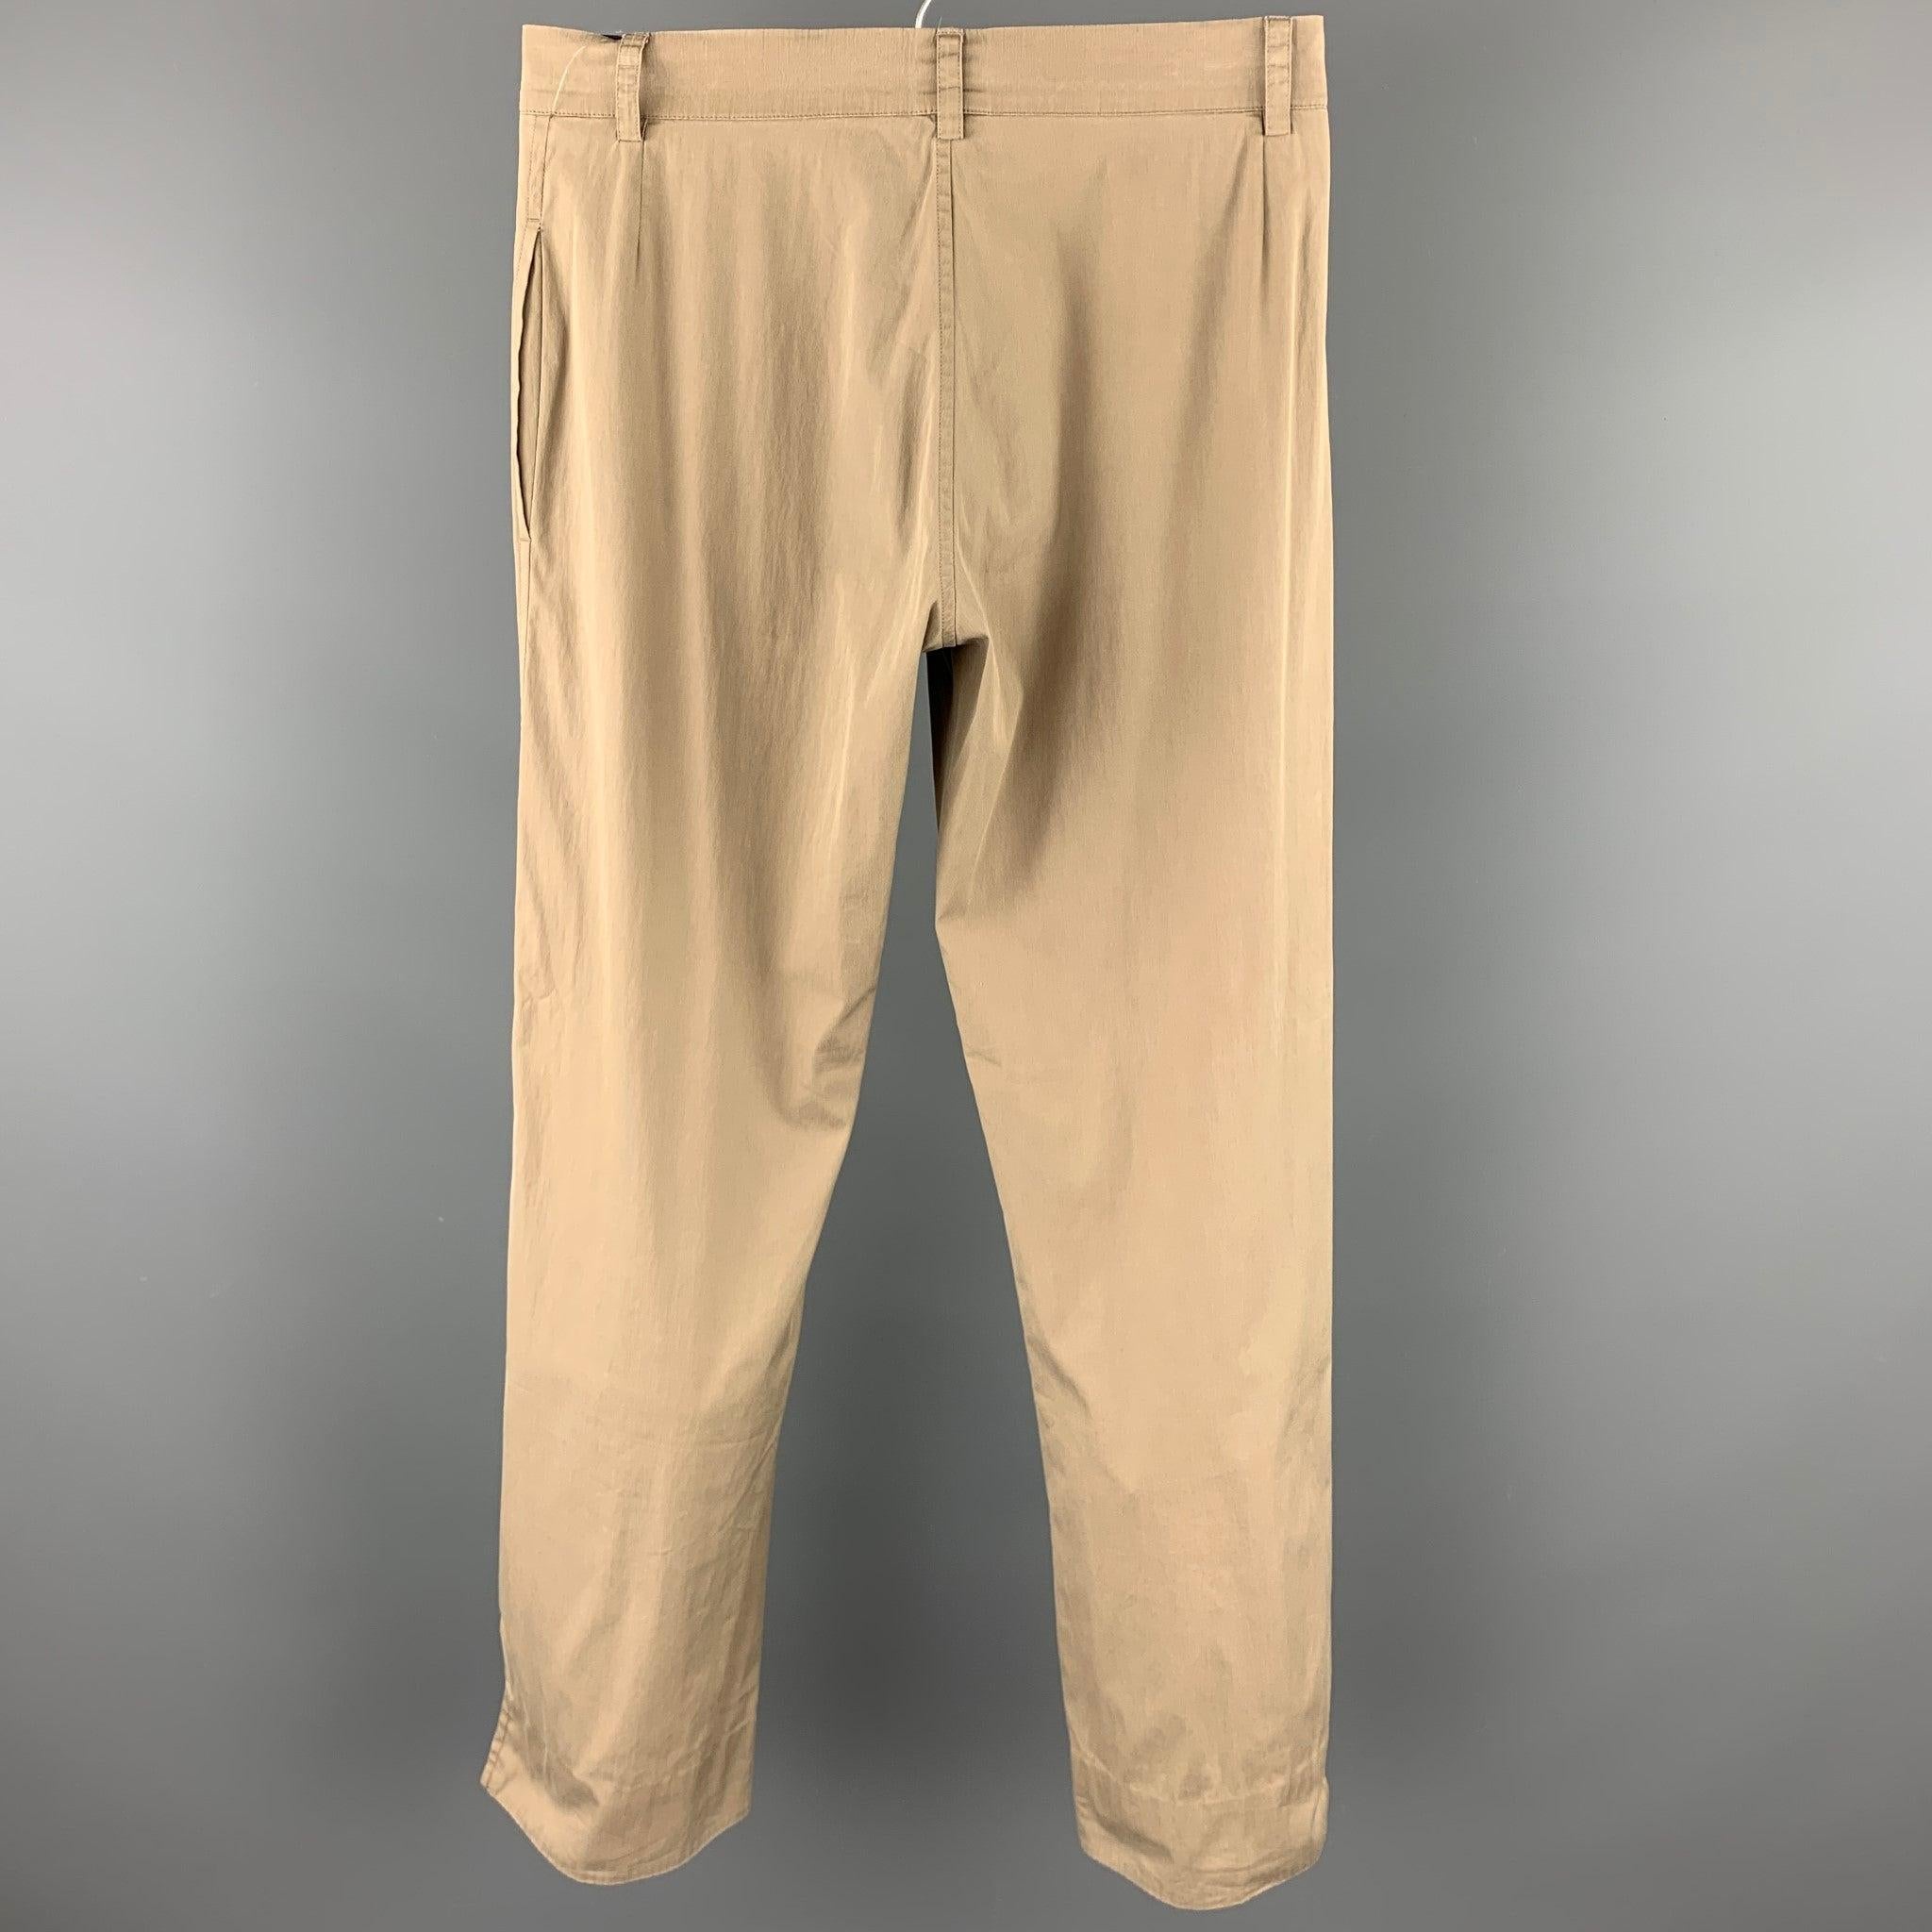 JIL SANDER dress pants comes in a taupe cotton featuring a straight leg and a zip fly closure. Made in Italy.
Very Good
Pre-Owned Condition. 

Marked:   32 

Measurements: 
  Waist: 28 inches 
Rise: 9 inches 
Inseam: 29 inches 
  
  
 
Reference: